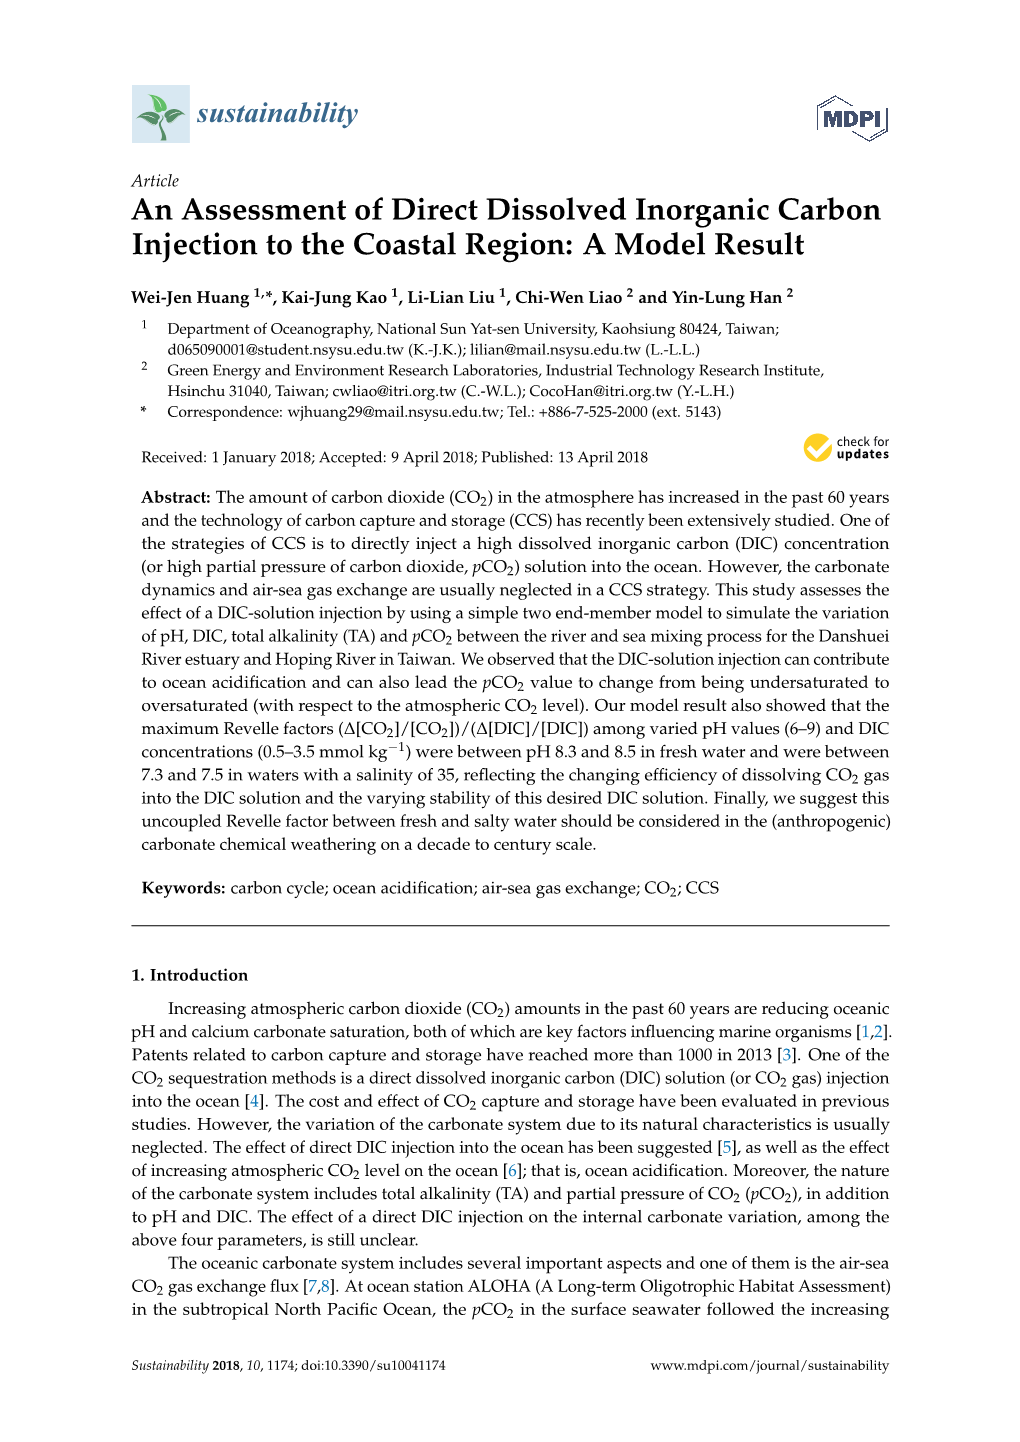 An Assessment of Direct Dissolved Inorganic Carbon Injection to the Coastal Region: a Model Result